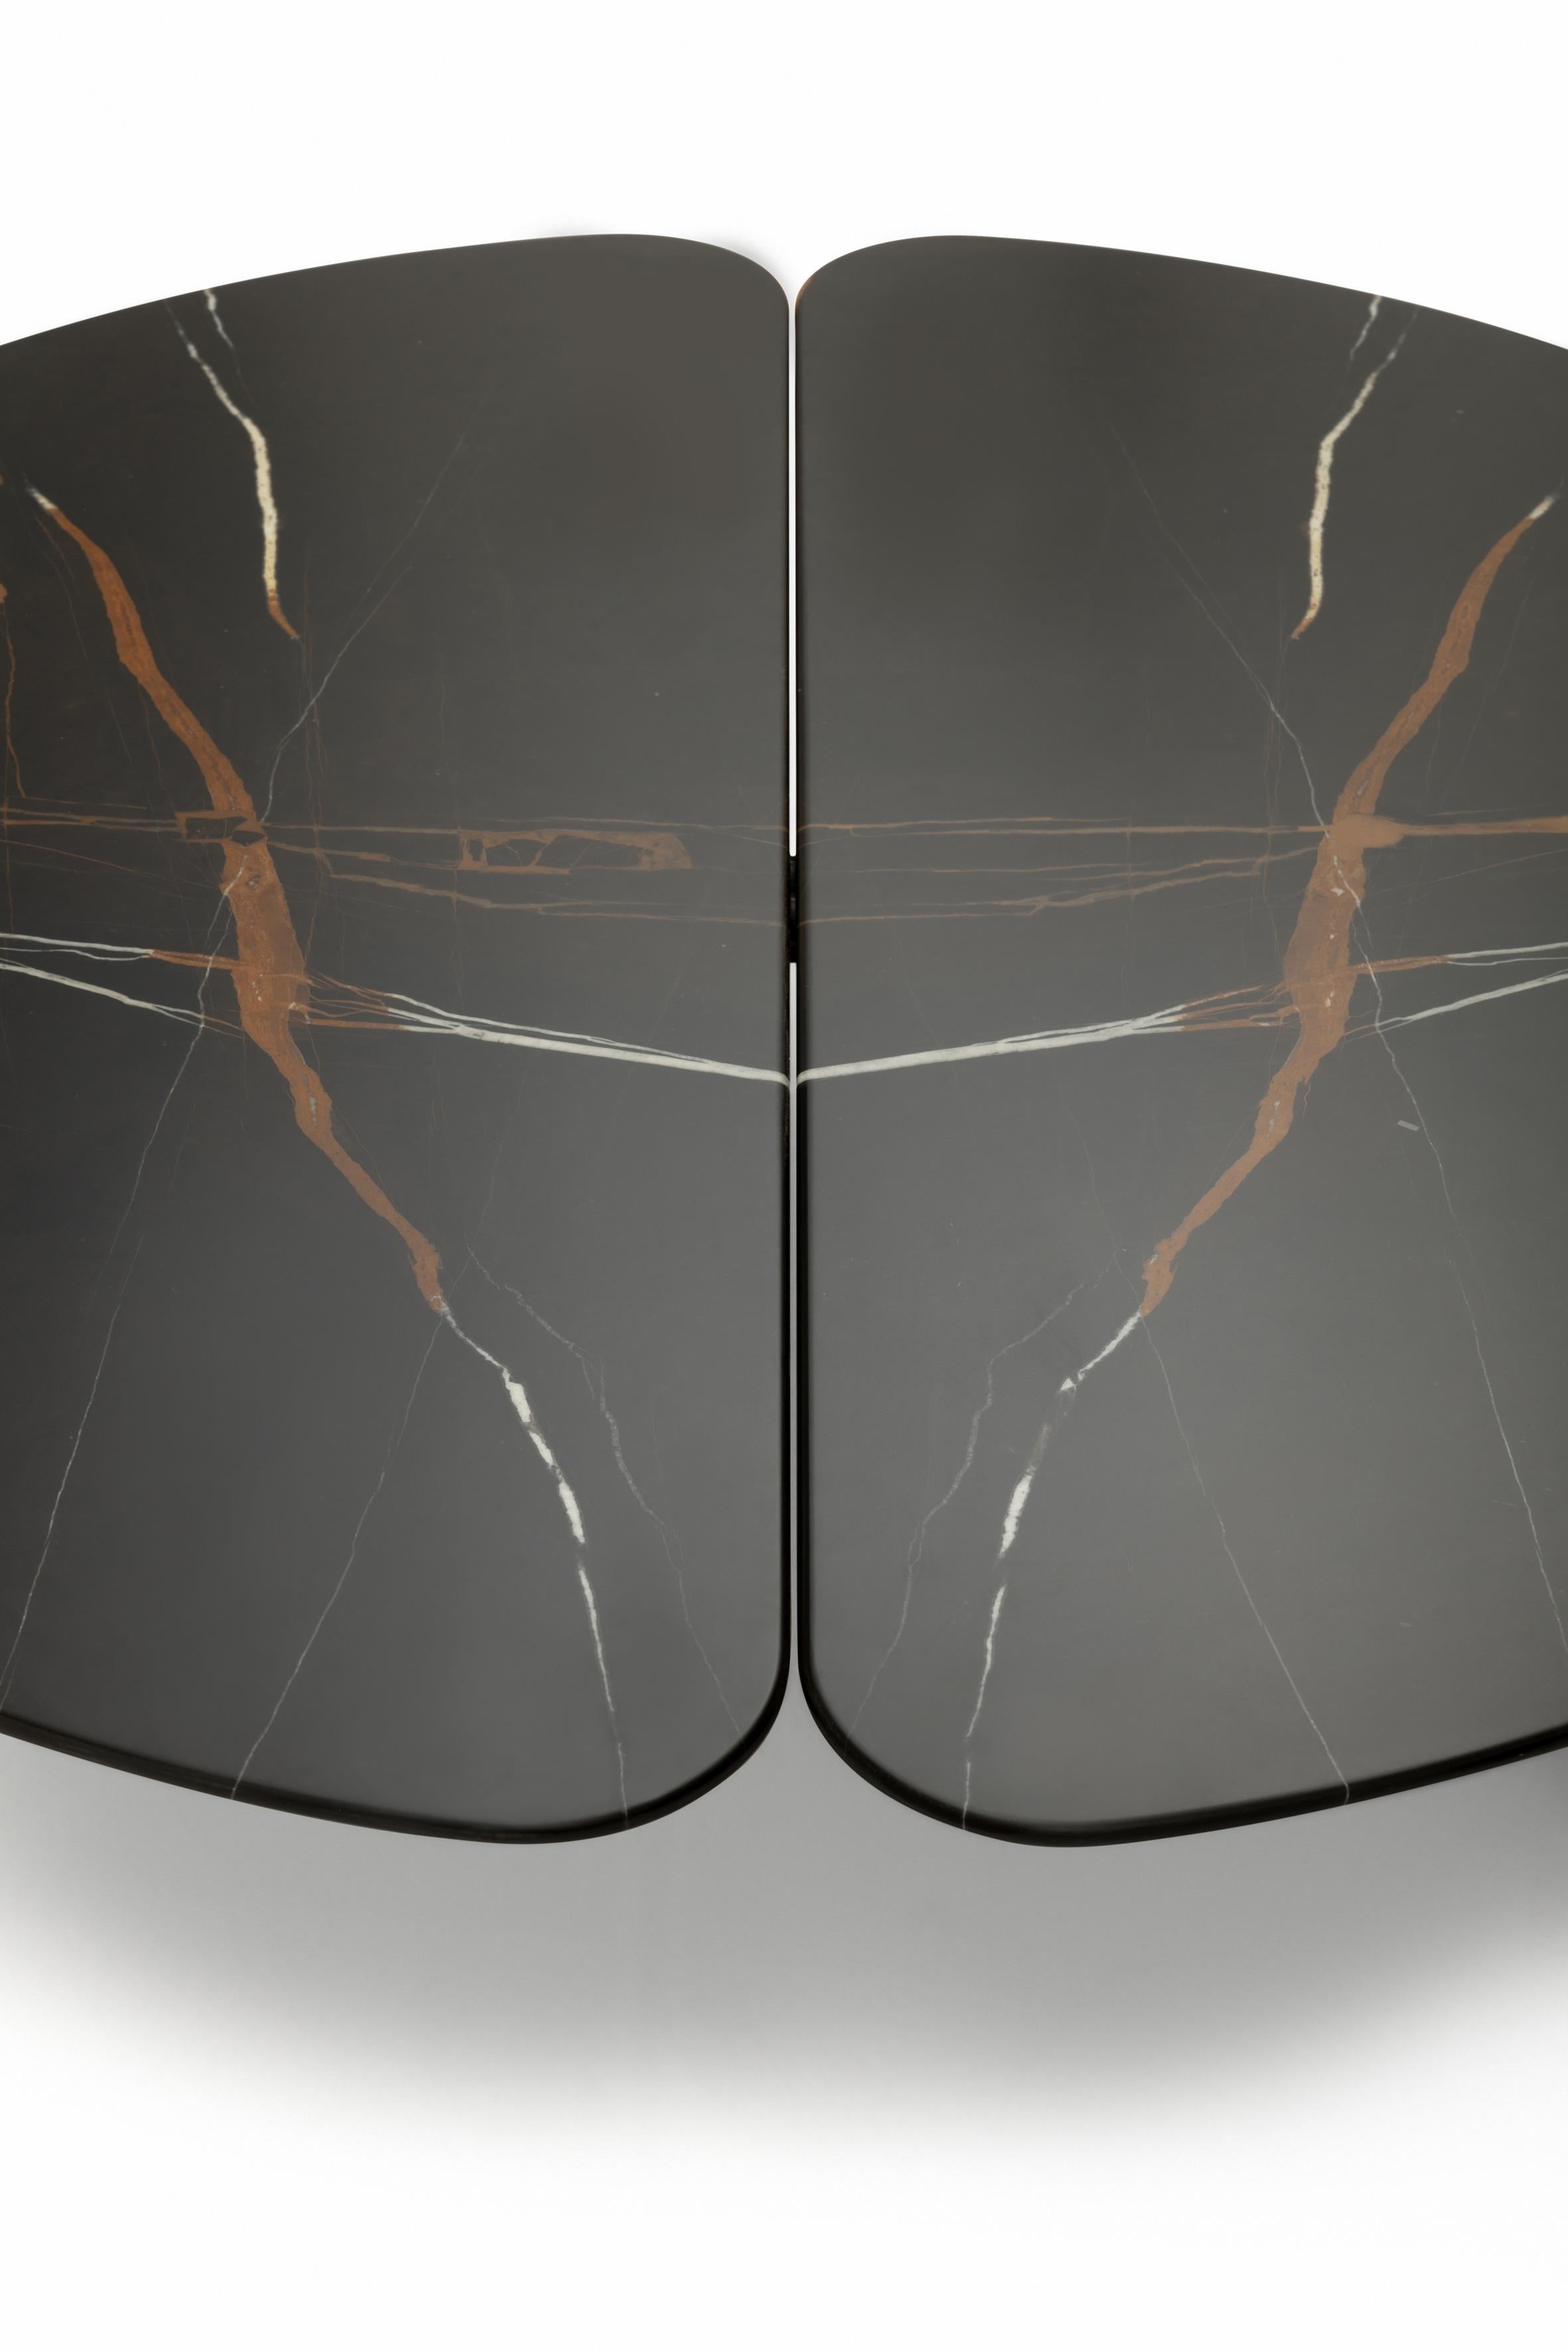 Italian Zanotta Graphium Small Table in Sahara Noir Marble Top with Black Steel Frame For Sale